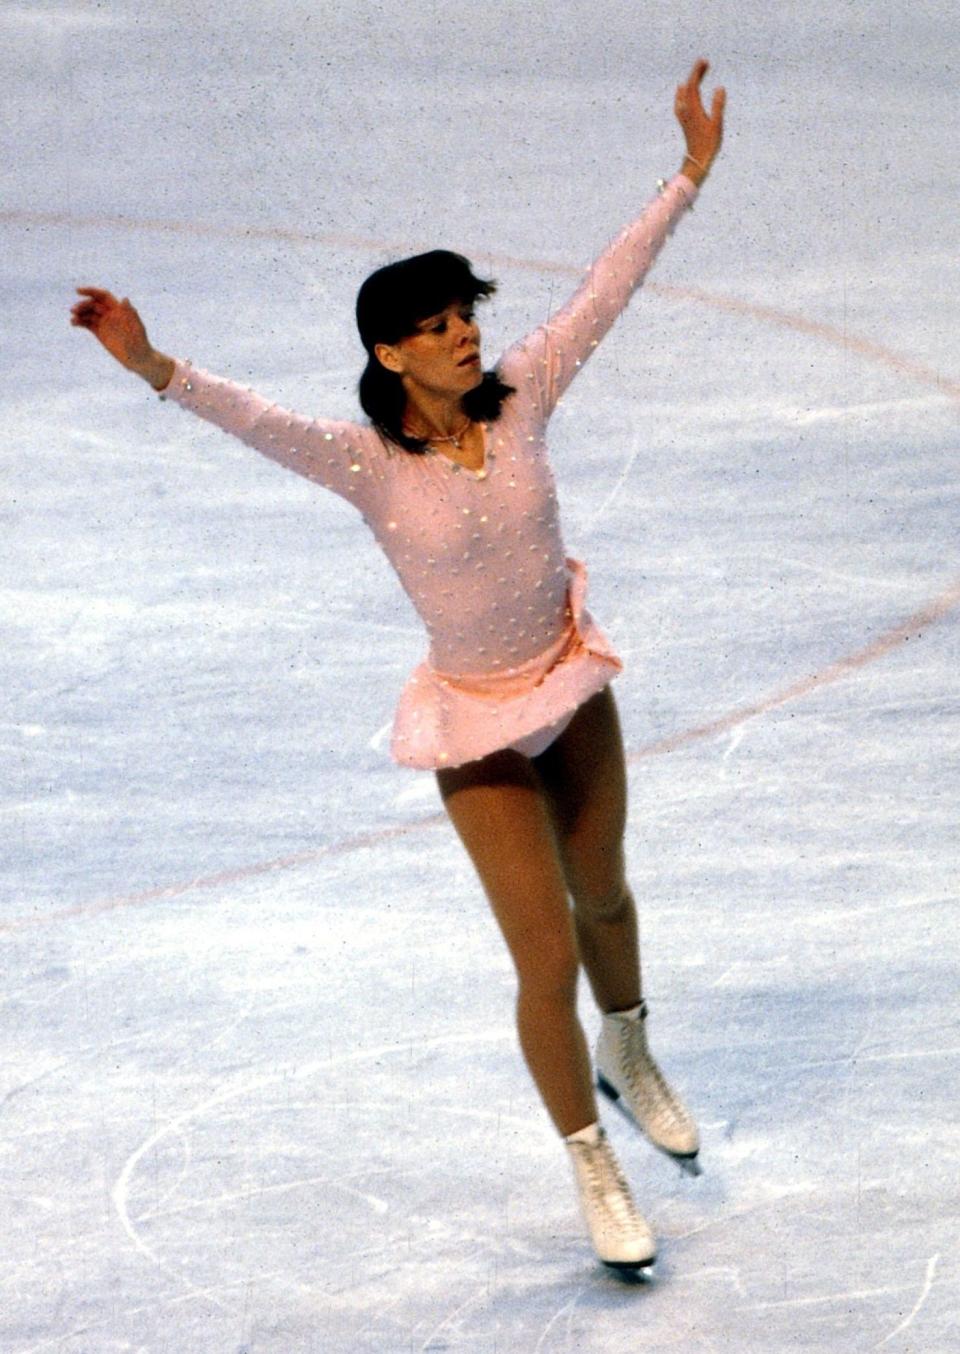 The West German skater performing at the 1980 Winter Olympics in Lake Placid, New York.